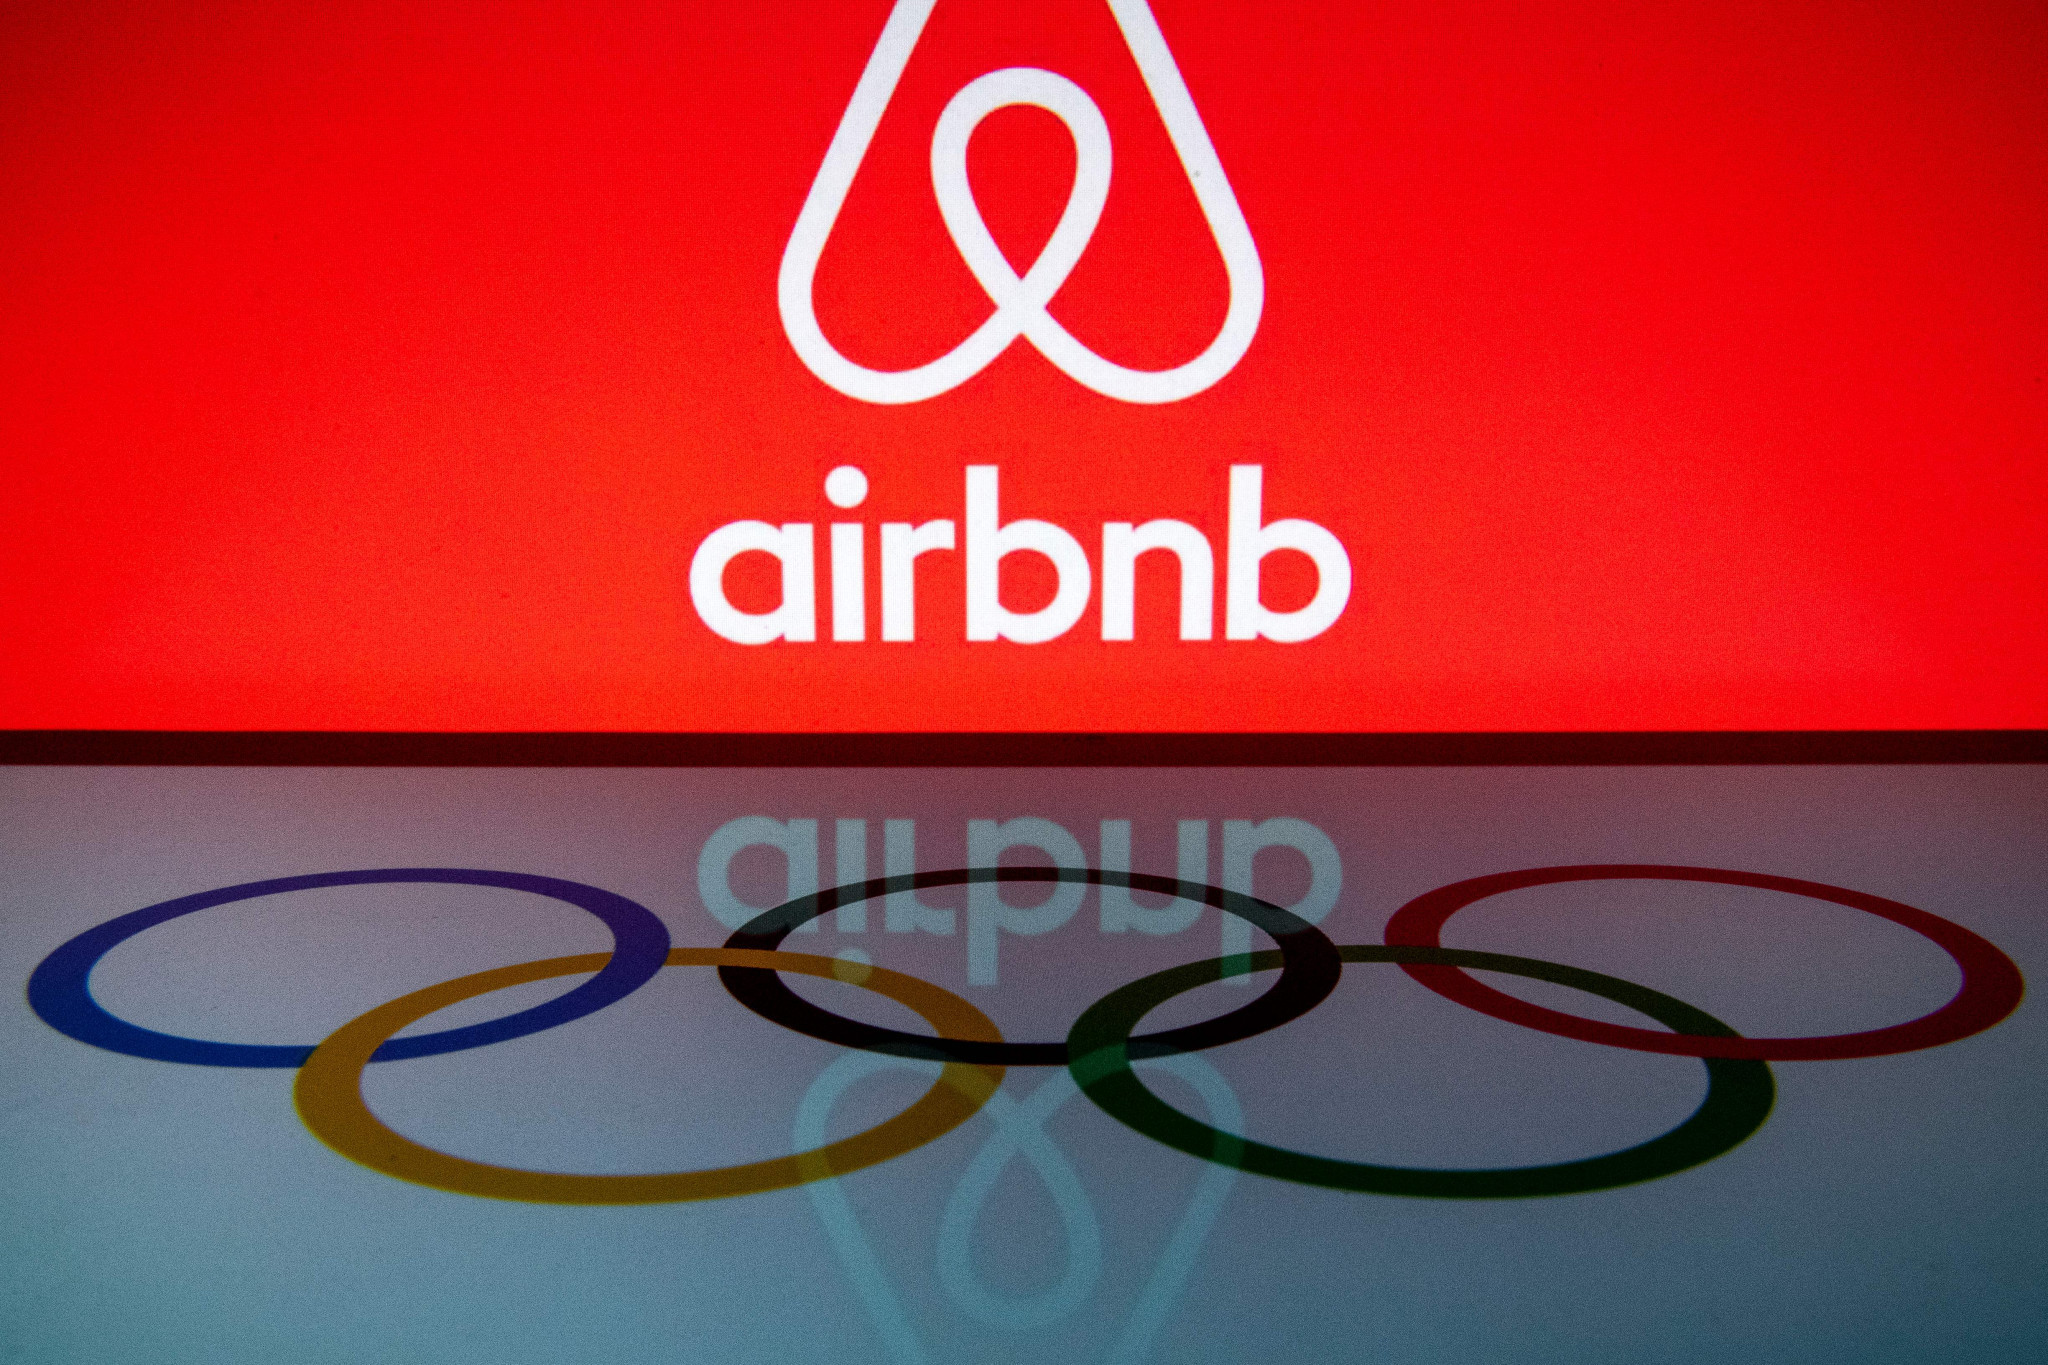 Airbnb becomes first Beijing 2022 sponsor to be targeted by Uighur campaigners